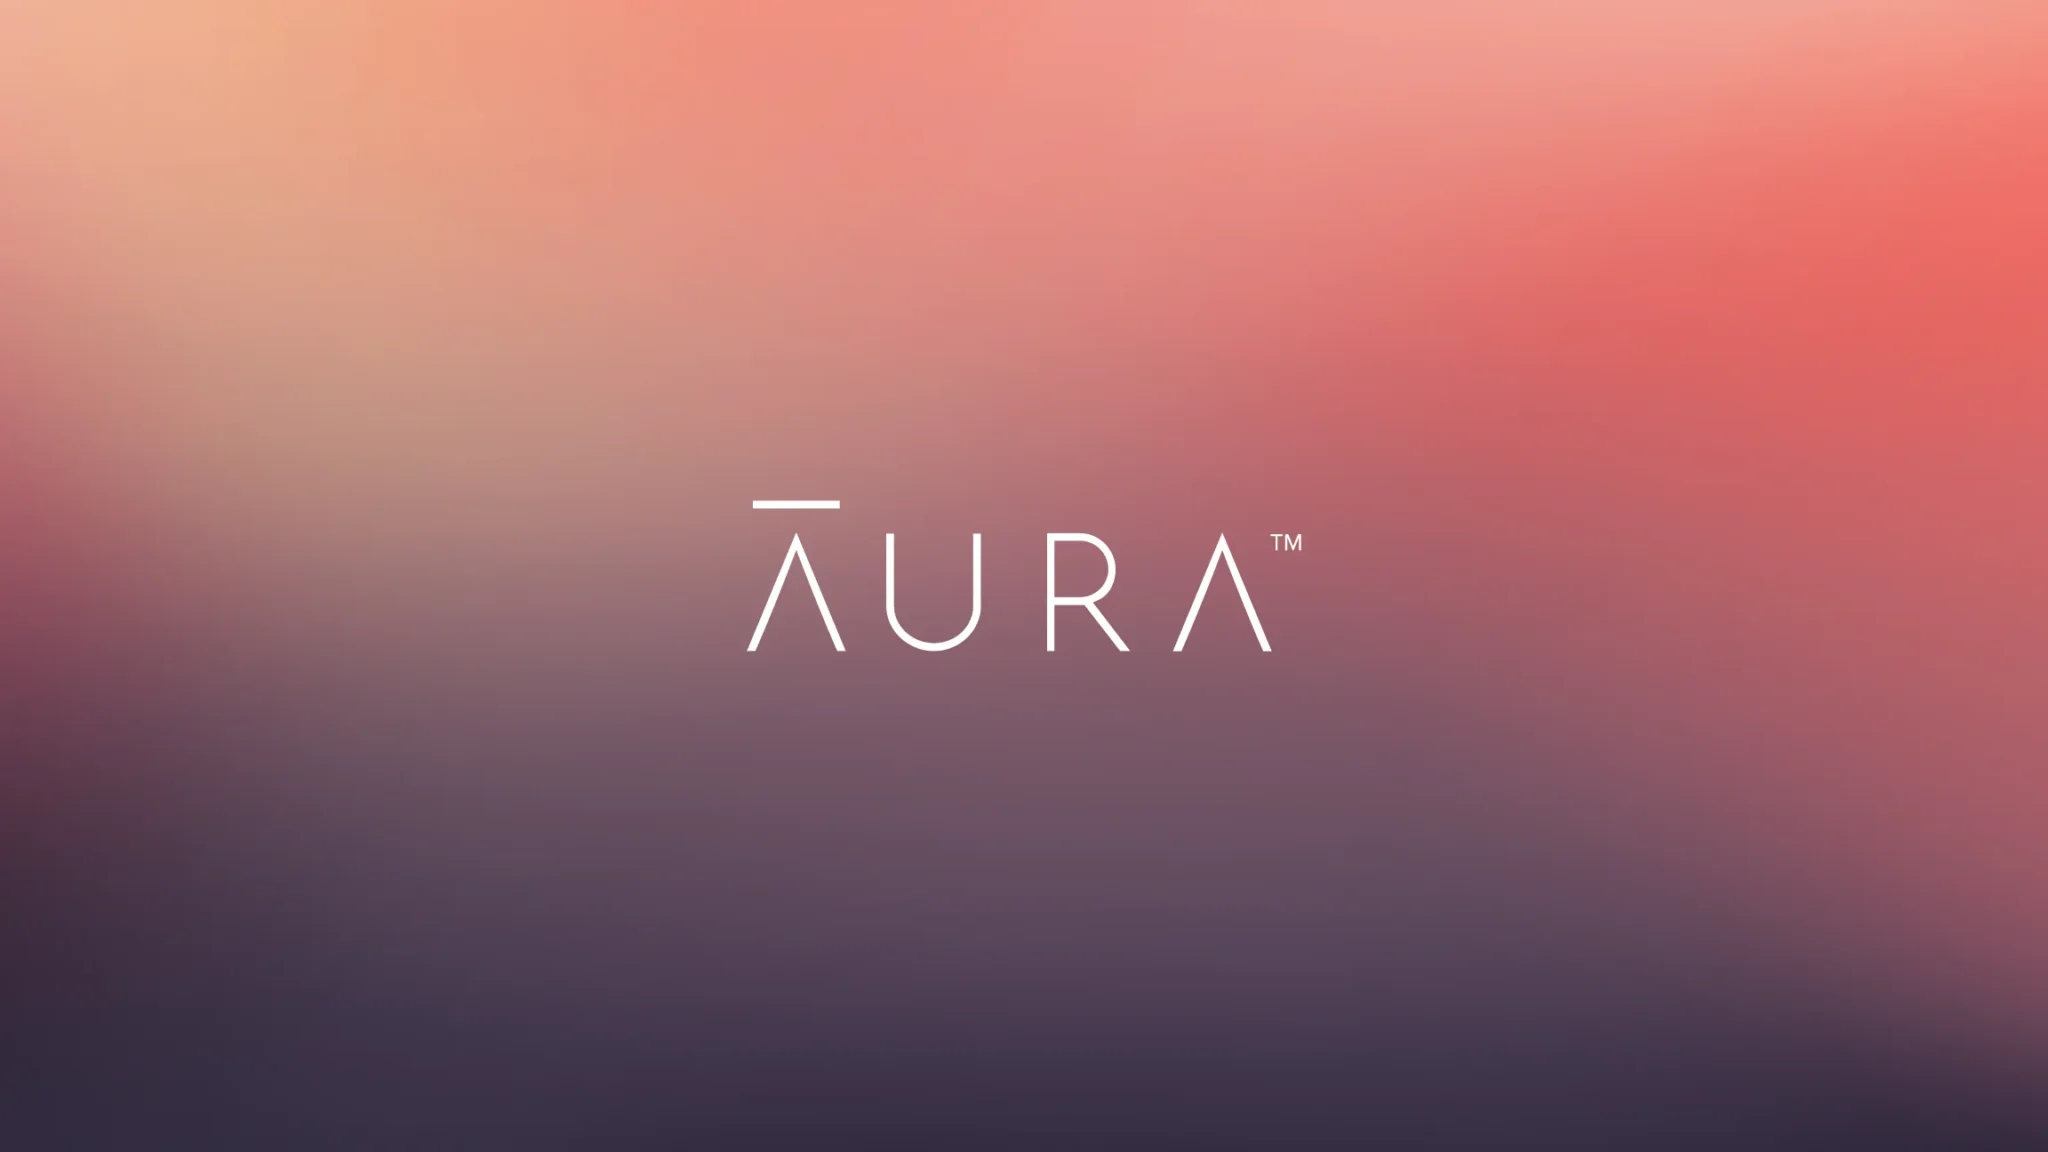 Aura Logo With Gradient Scaled